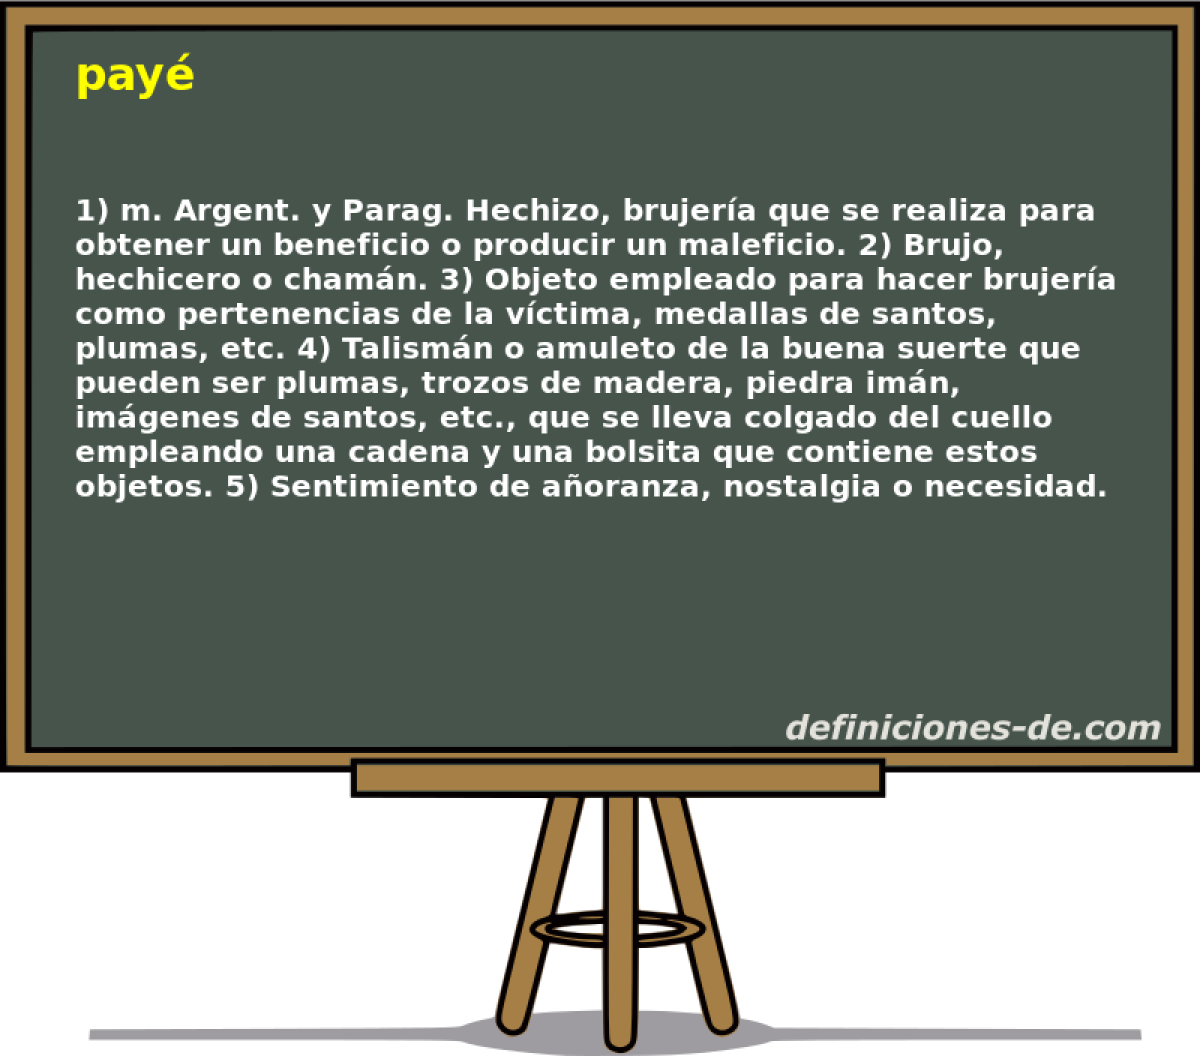 pay 